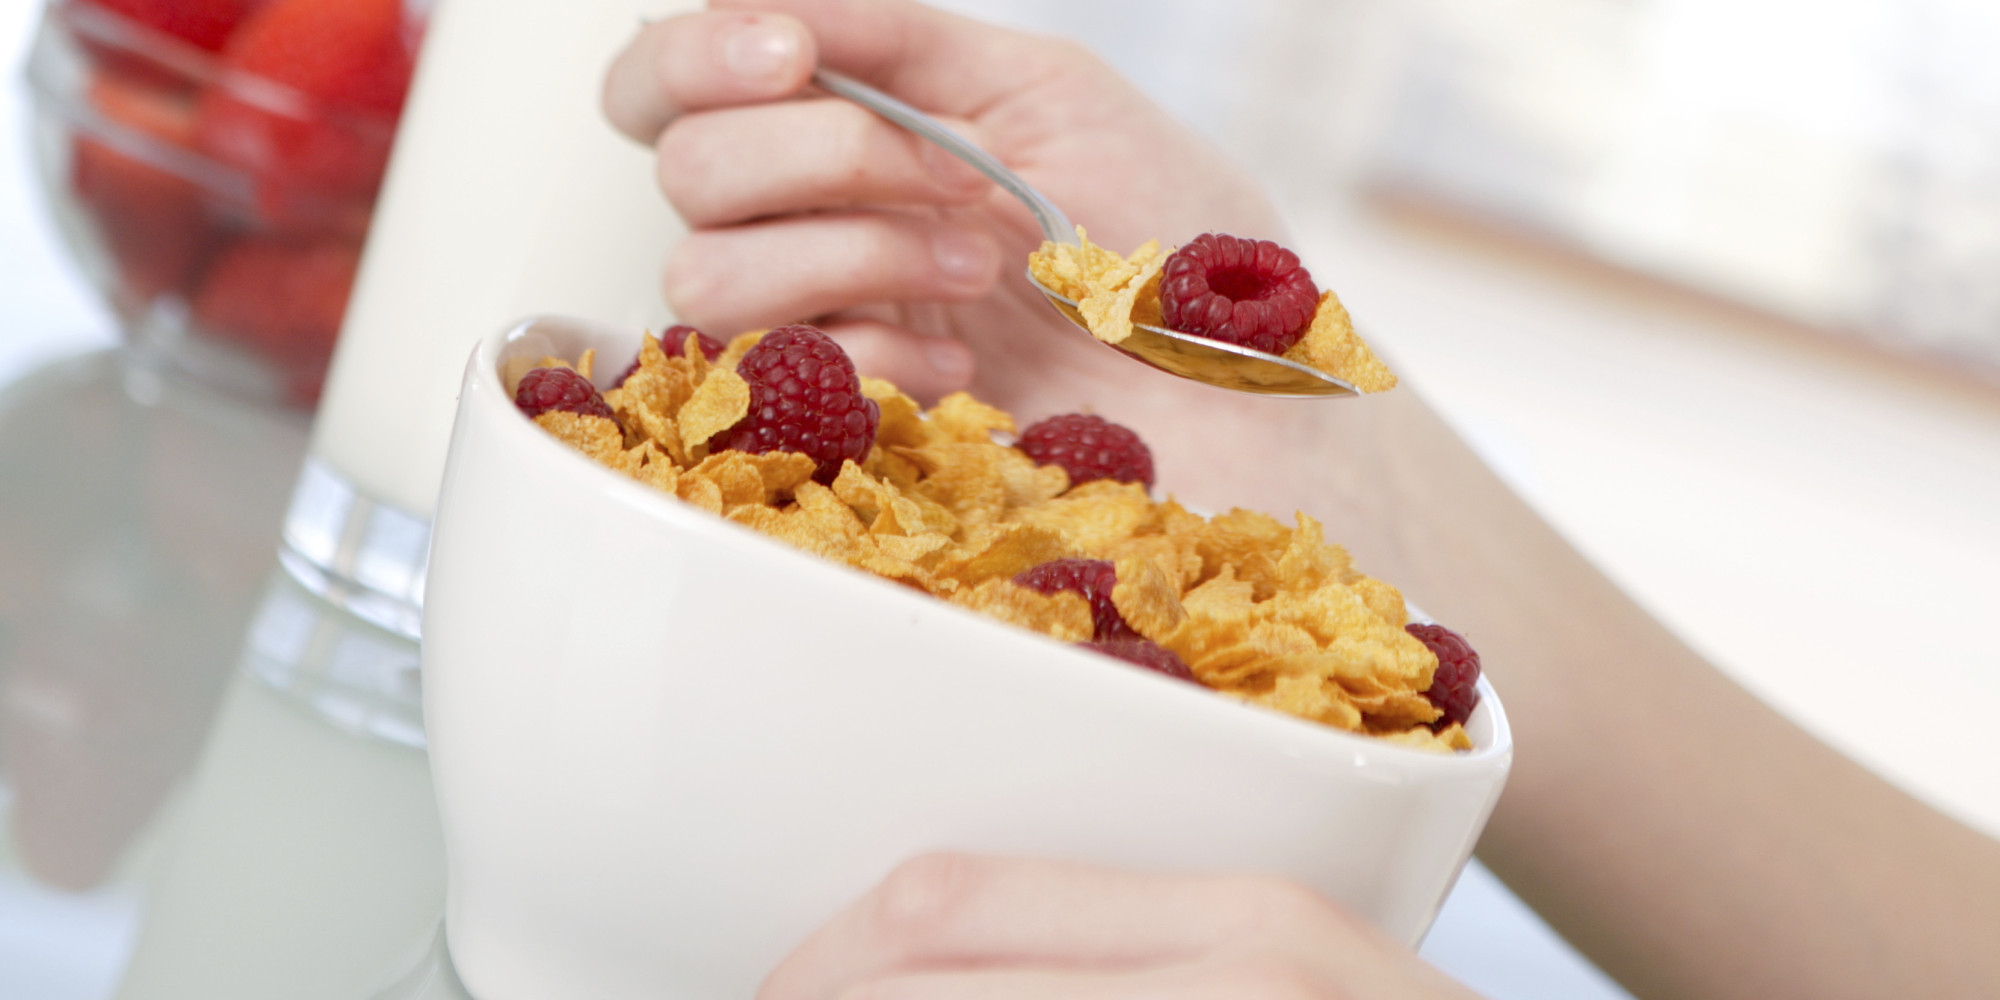 Healthy Breakfast For Teens
 Teens Who Skip Breakfast May Face Metabolic Syndrome Risk